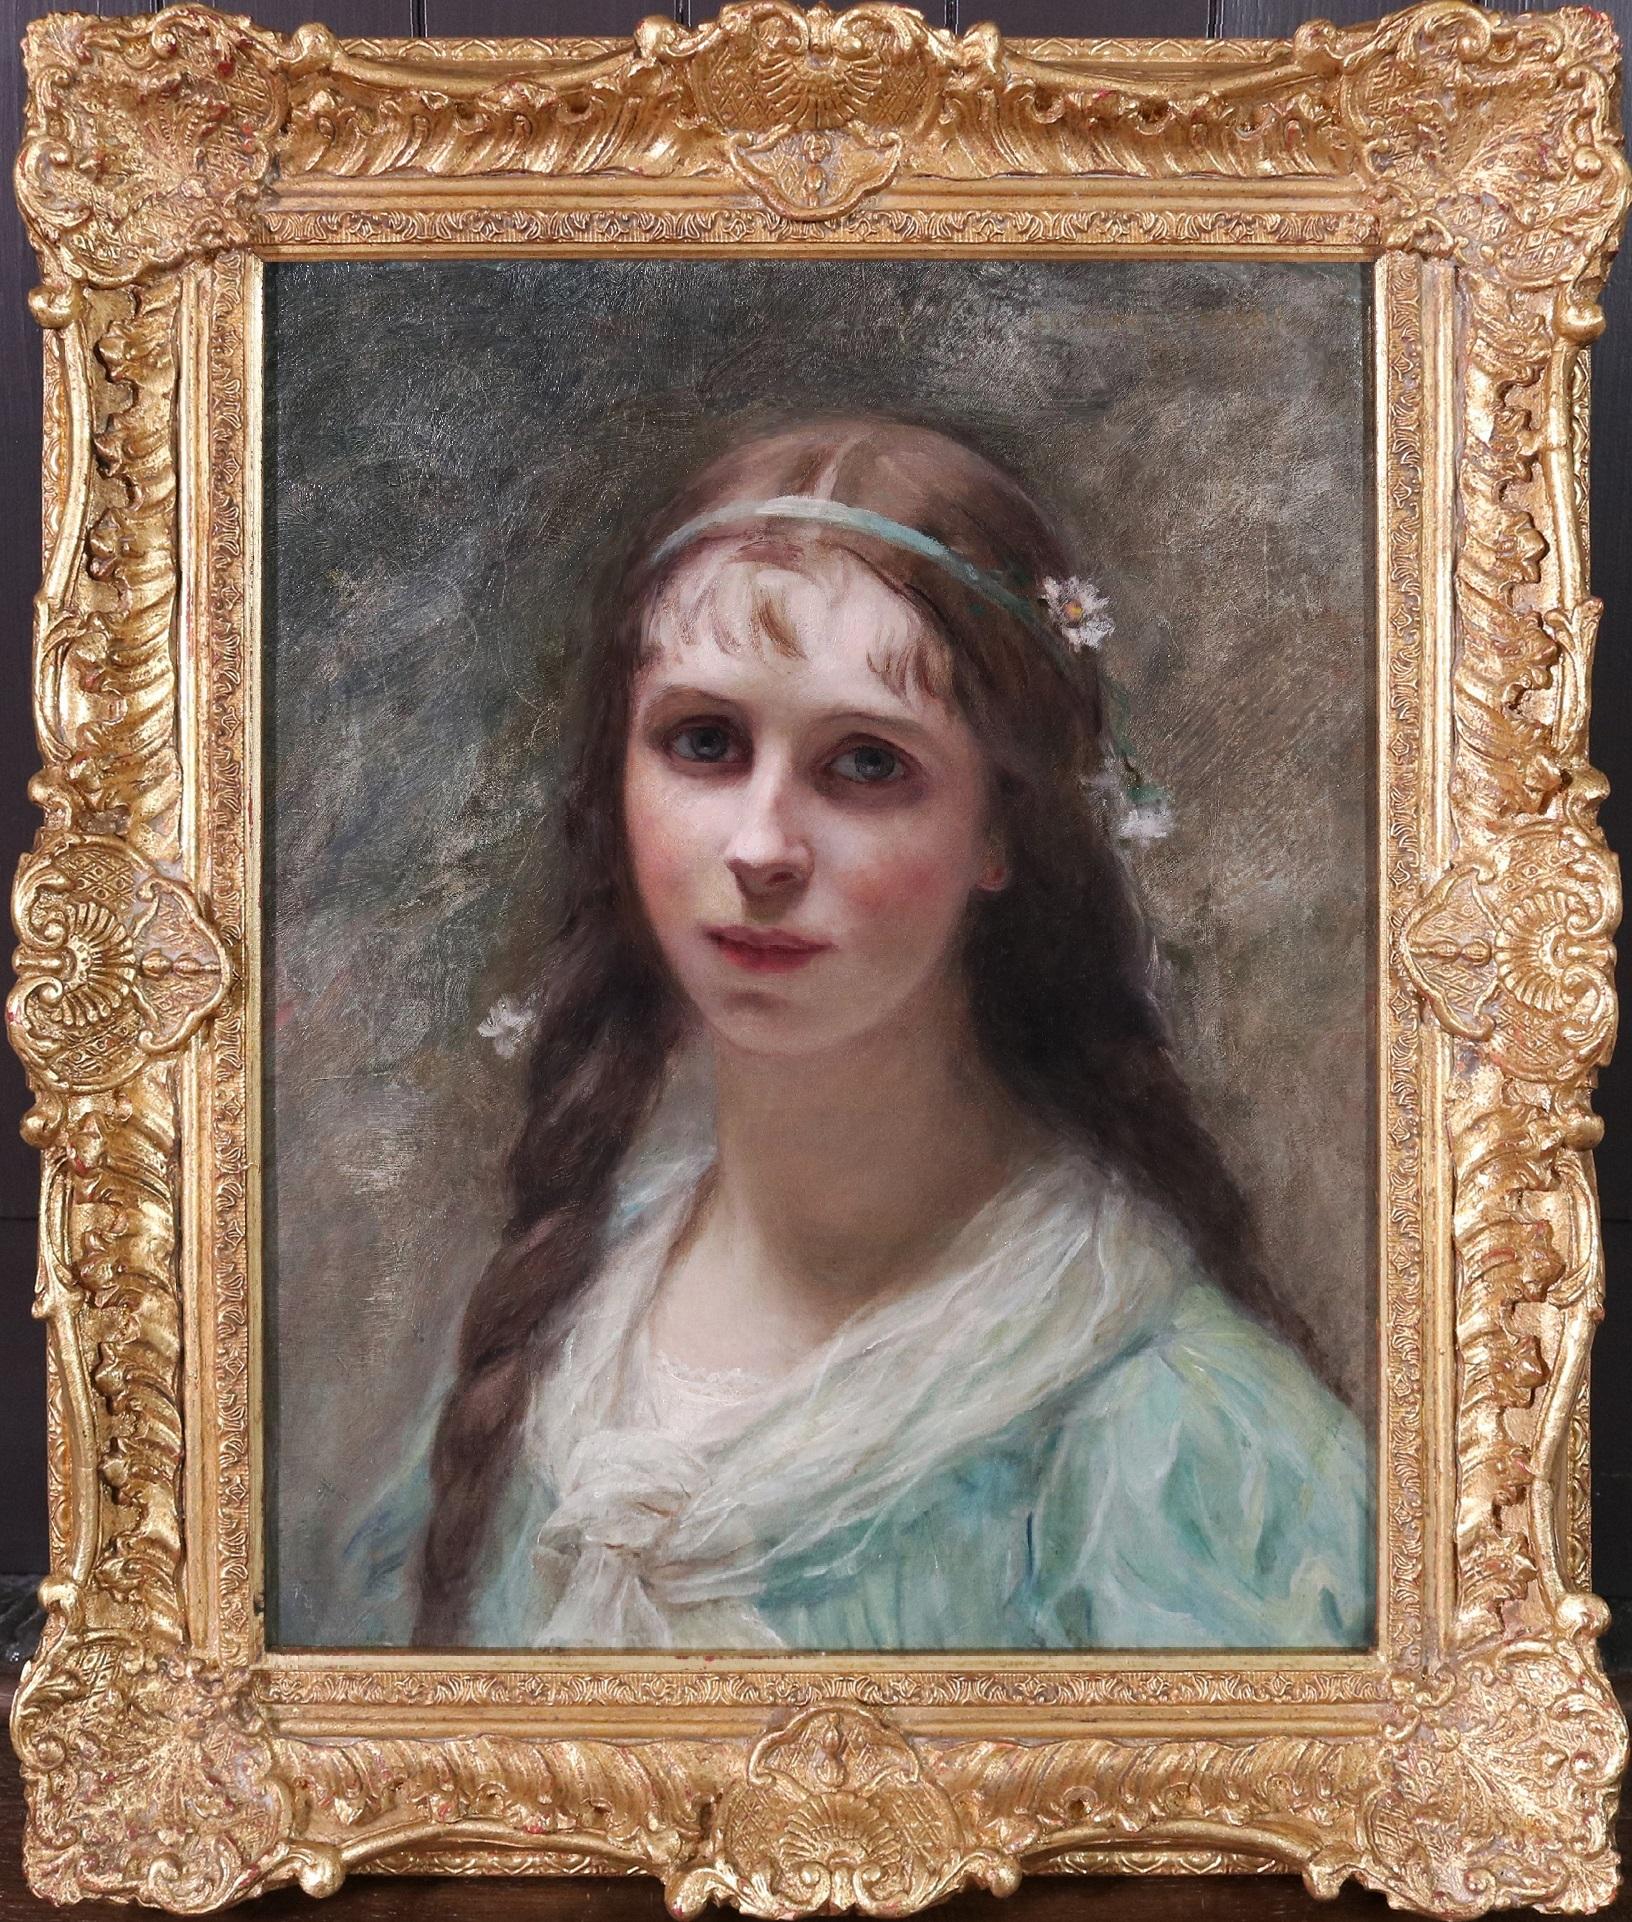 ‘La Couronne de Marguerite’ by Édouard-Louis-Lucien Cabane (1857-1942). 

The painting – which depicts a young French beauty wearing a crown of daisies – is signed by the artist and dated 1915. It hangs in a fine quality gold metal leaf